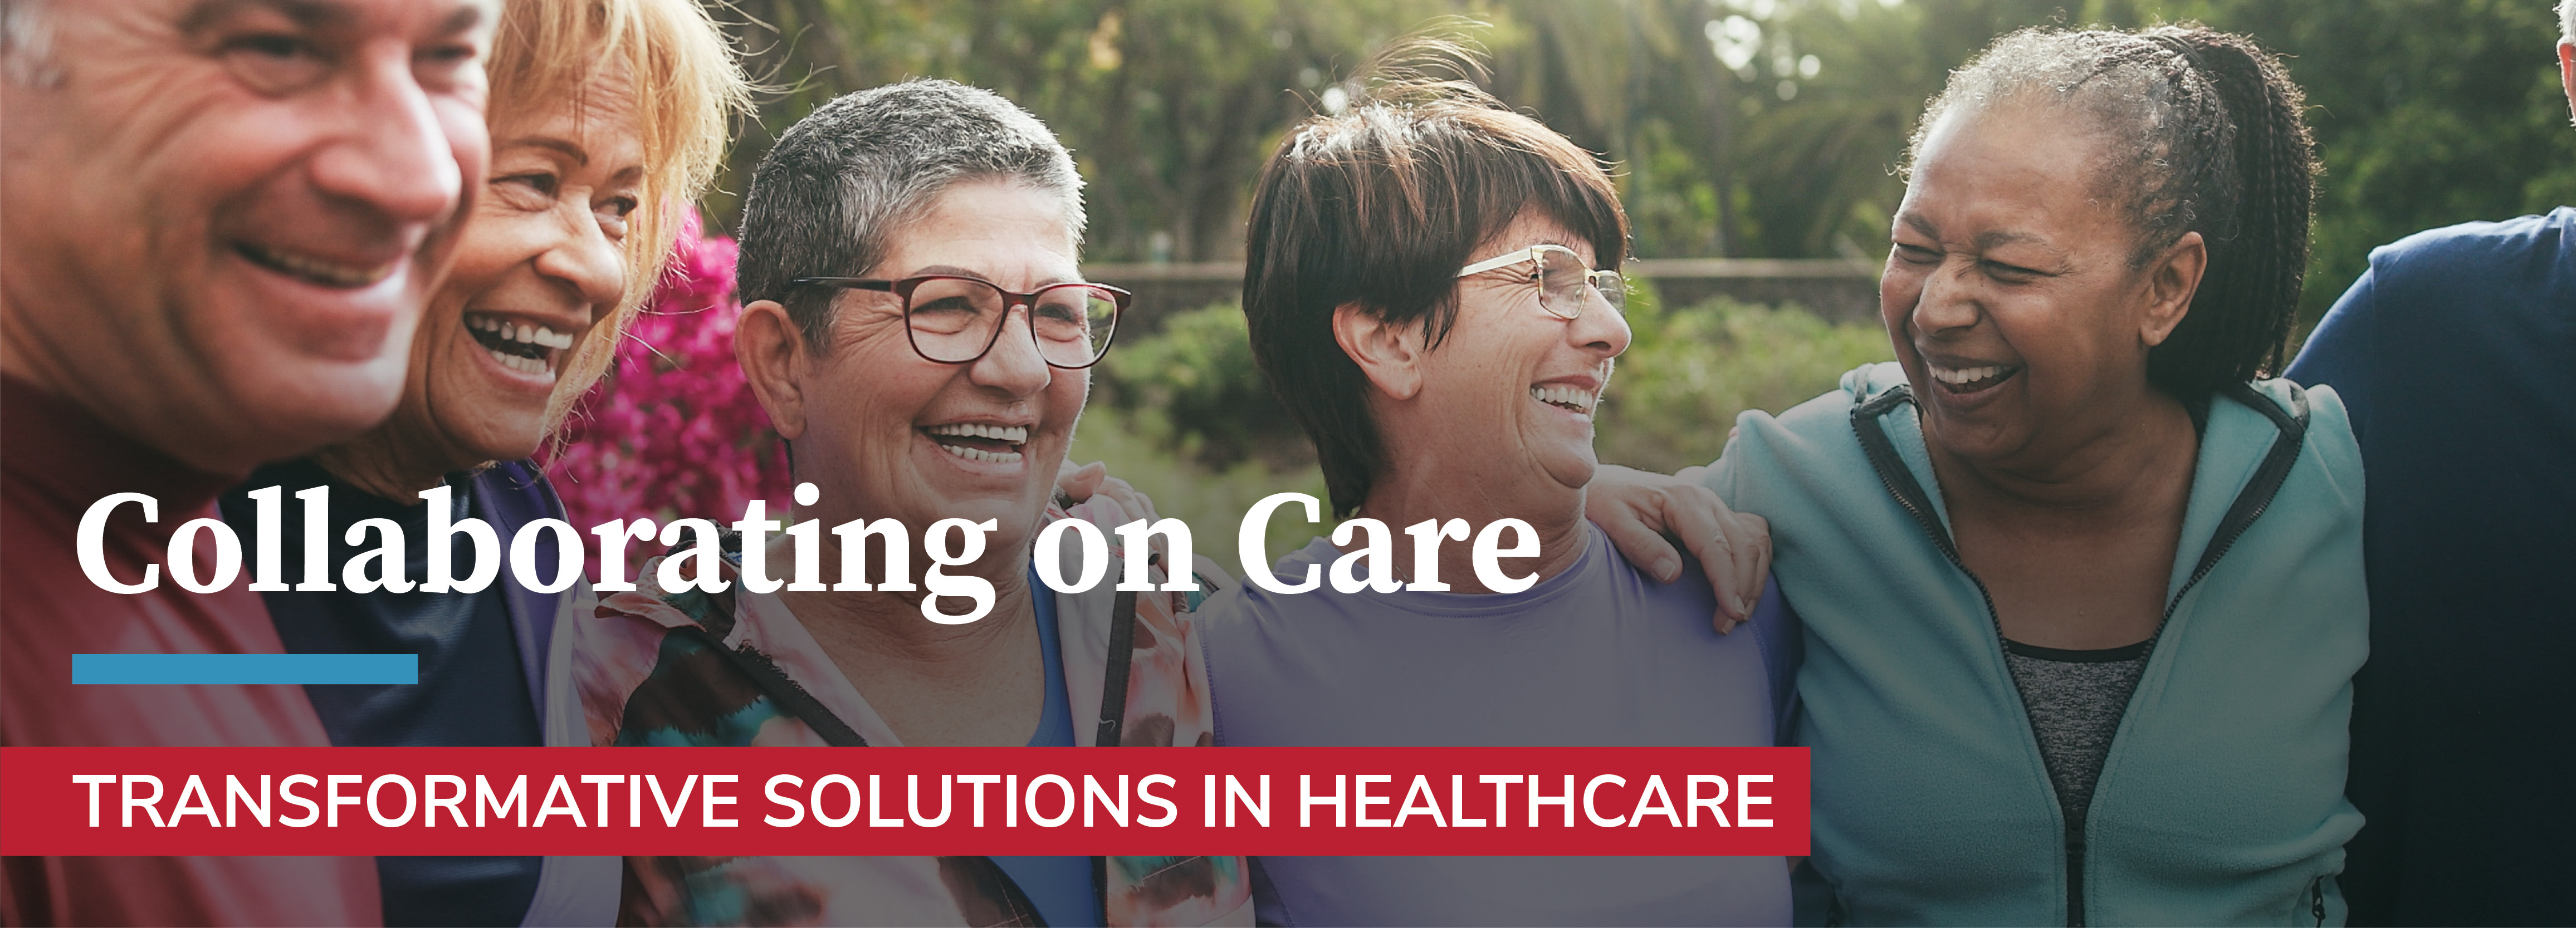 diverse group of older adults with the text Transformative Solutions in Healthcare: Collaborating on Care